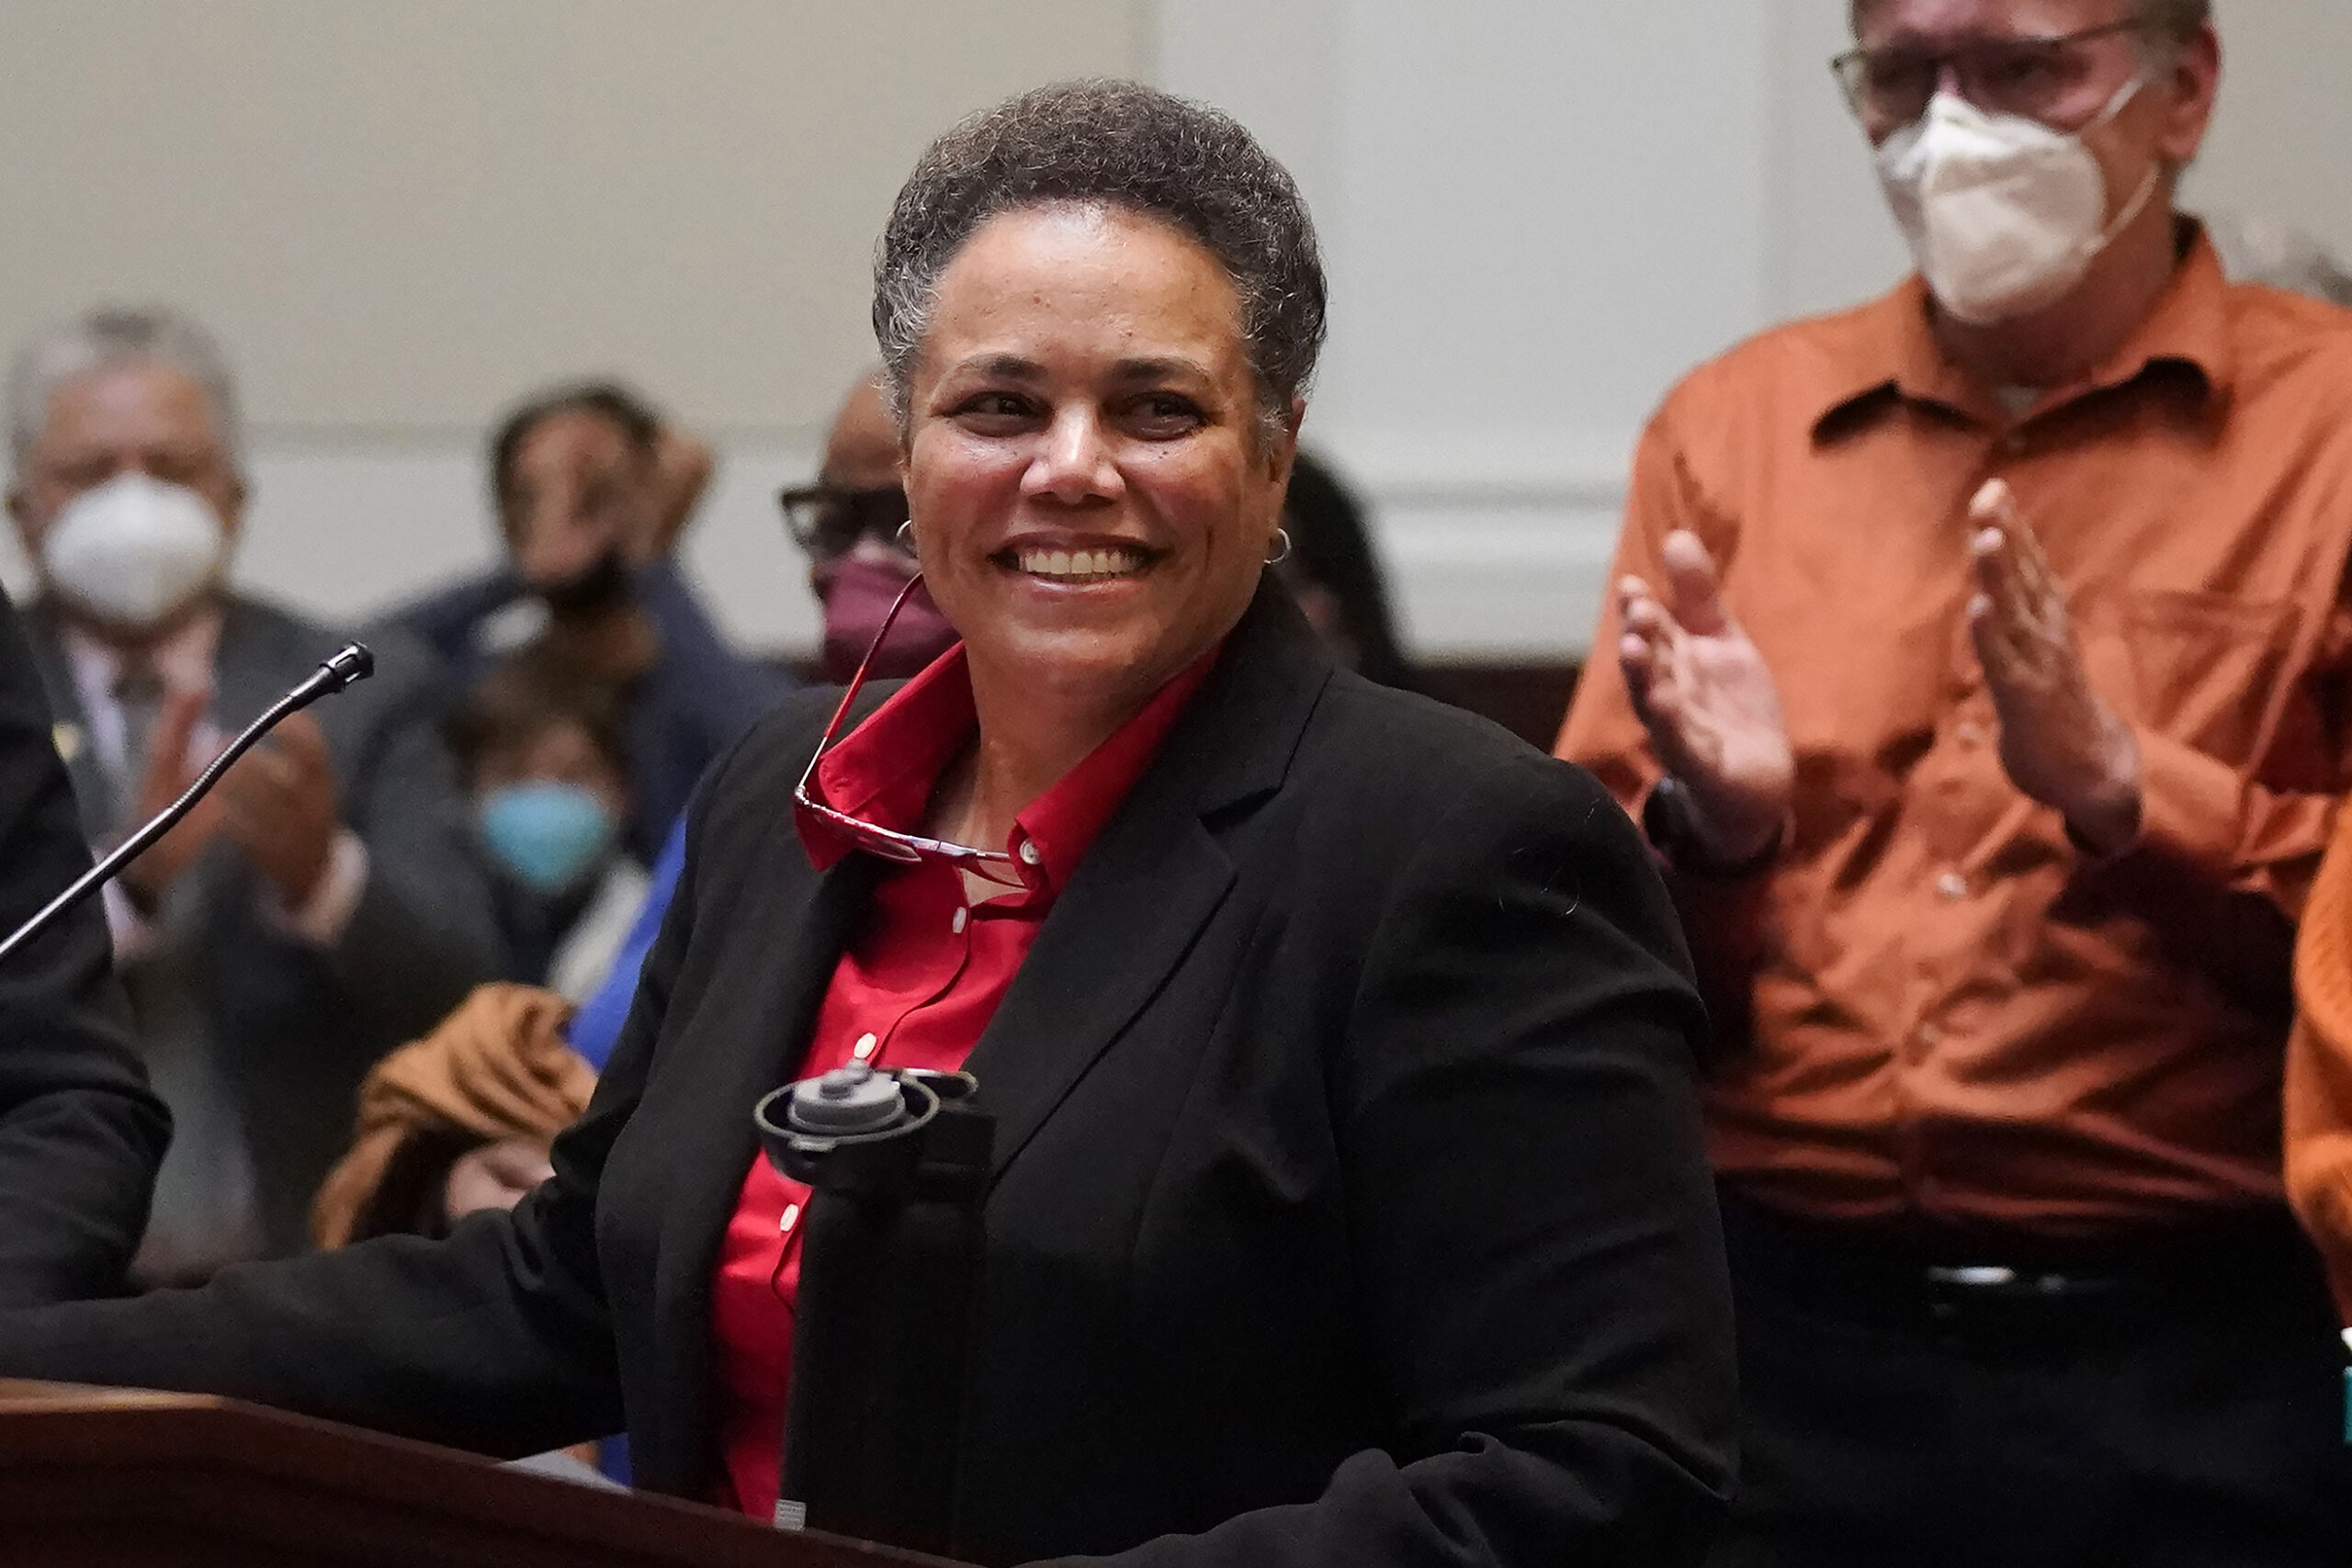 California’s Supreme Court seats its first queer woman of color